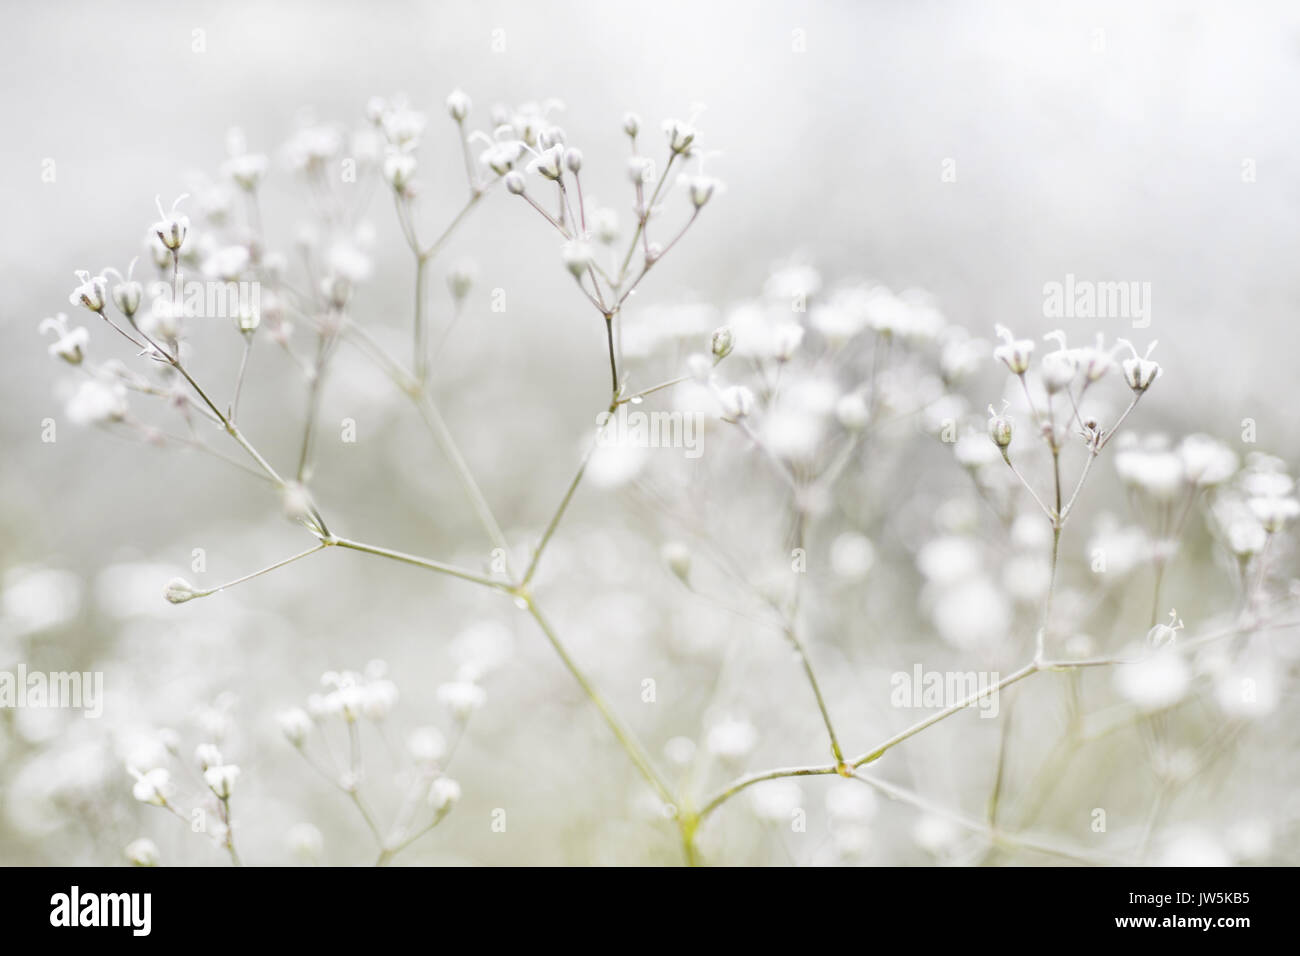 Small Defocused White Flowers (Gypsophila) as Natural Background Stock Photo